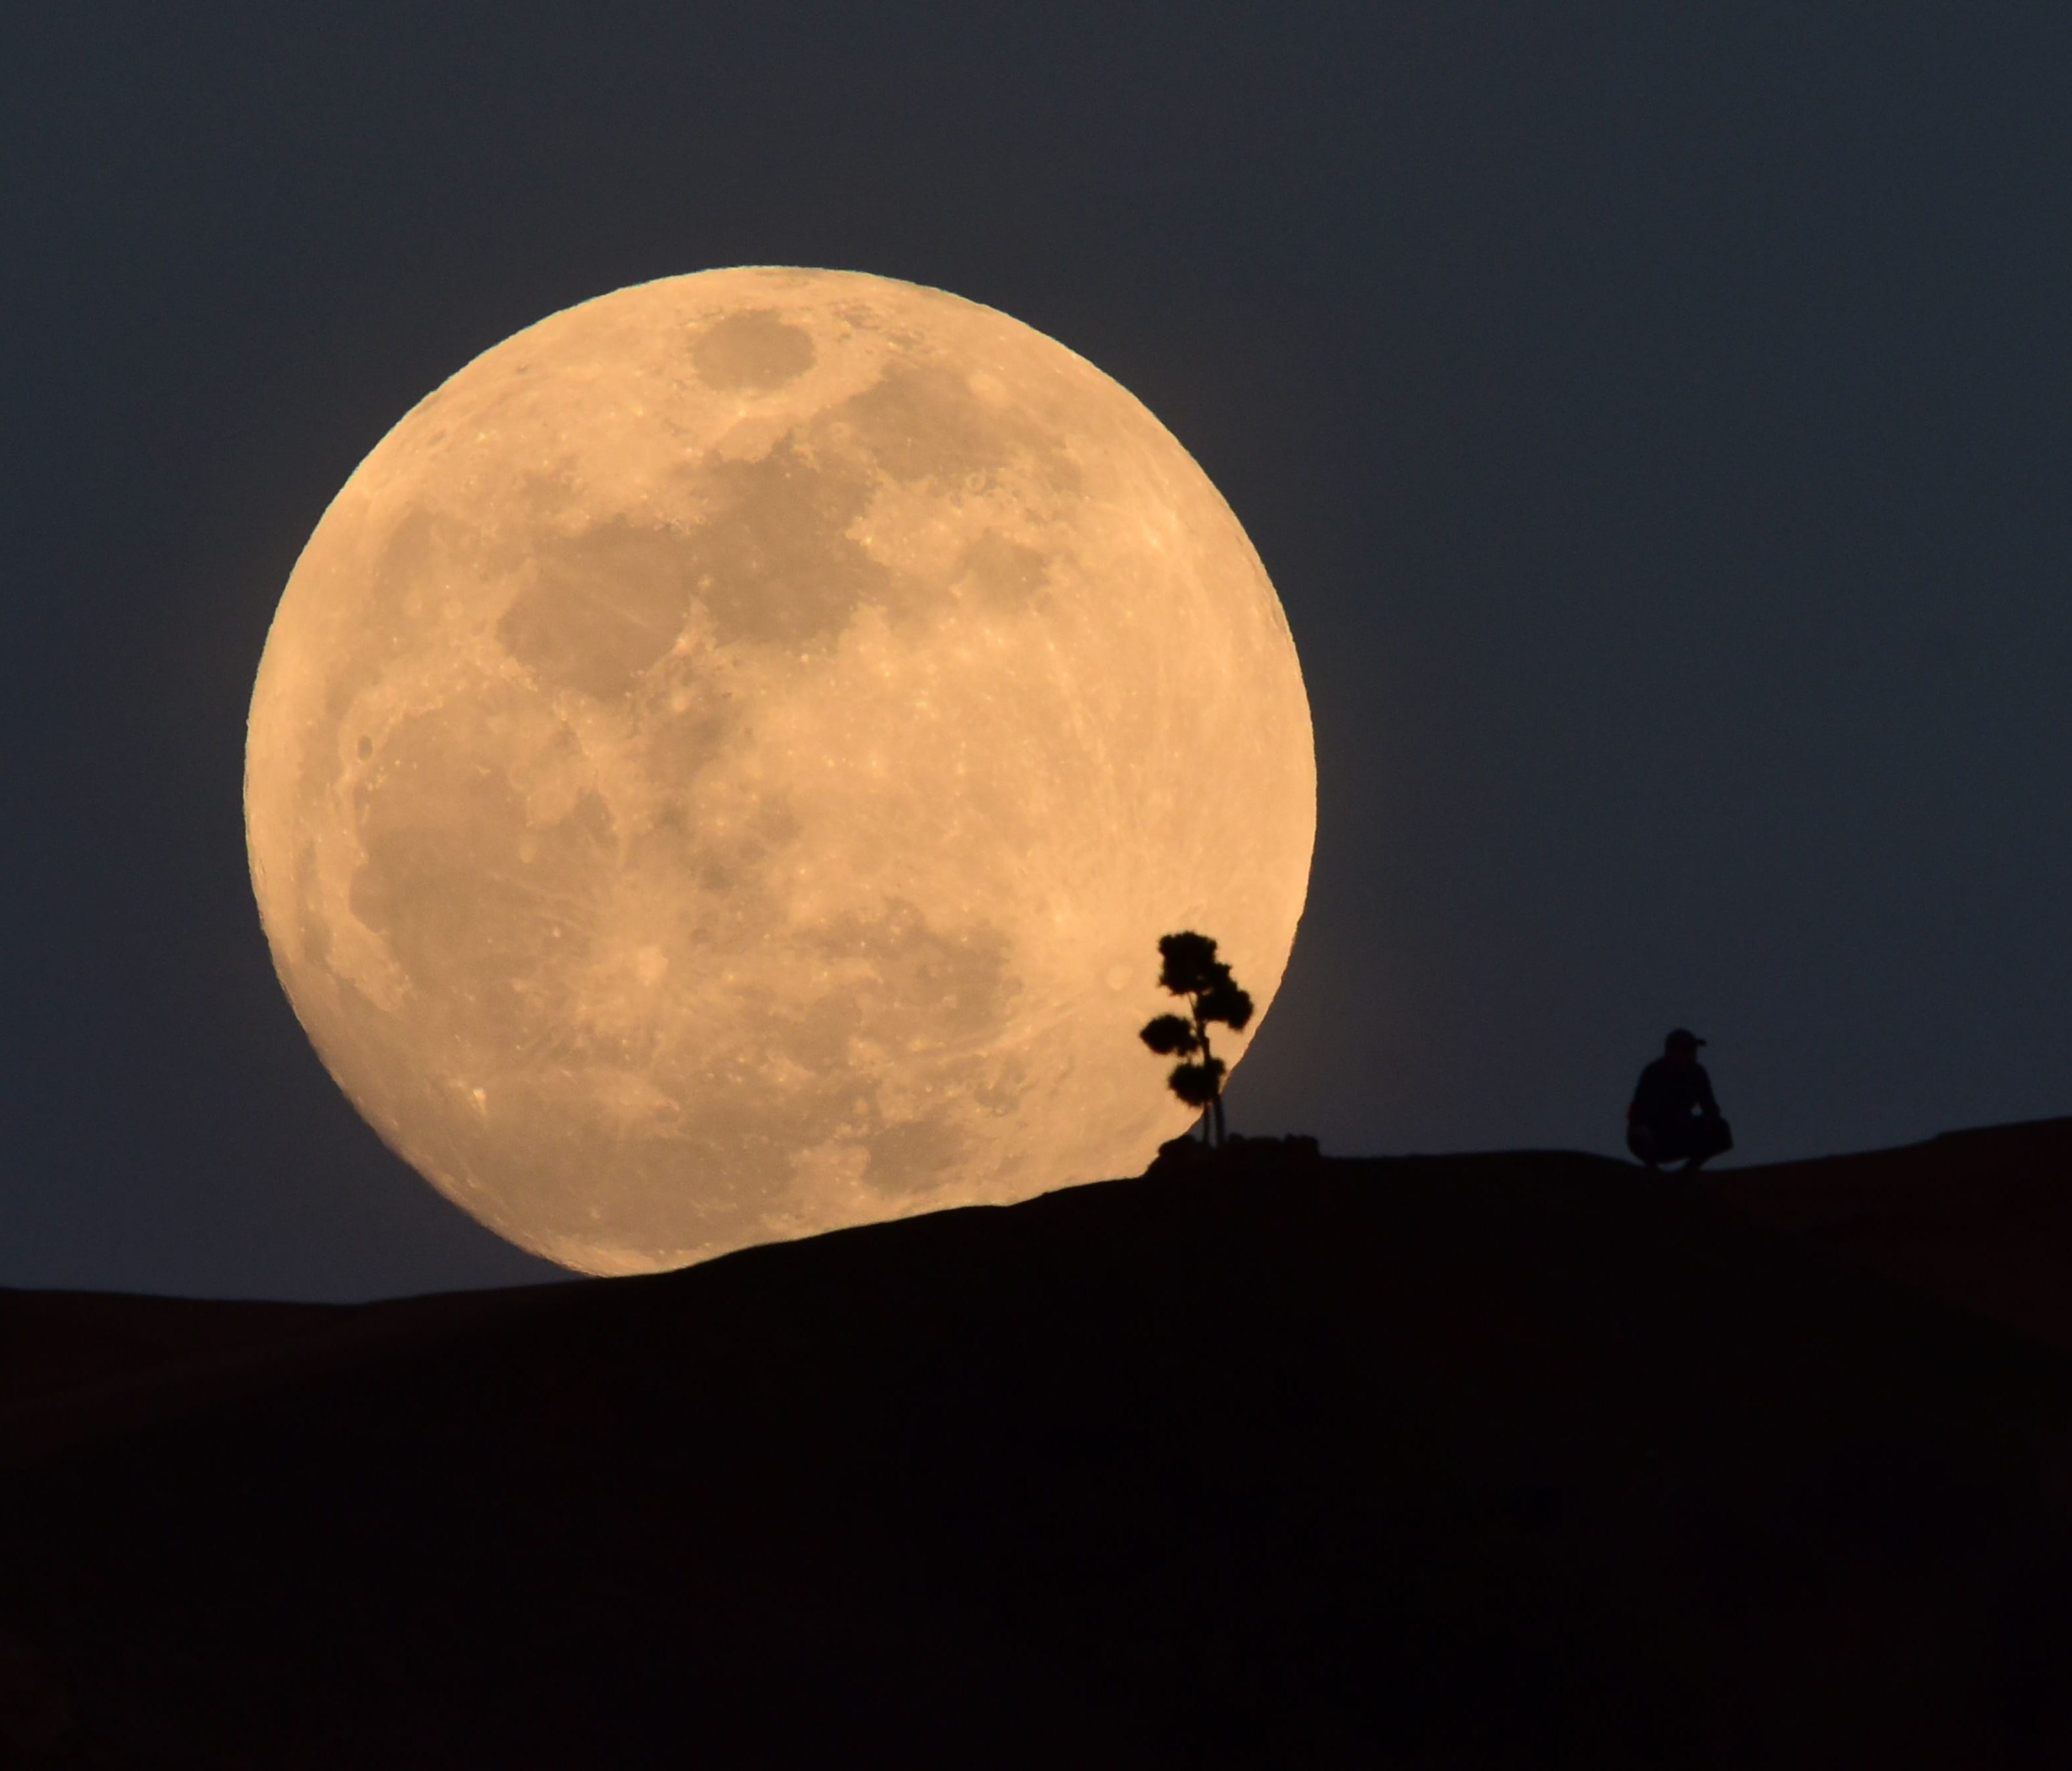 TOPSHOT - A person poses for a photo as the moon rises over Griffith Park in Los Angeles, California, on January 30, 2018.  Many parts of the globe may catch a glimpse on january 31 of a giant crimson moon, thanks to a rare lunar trifecta that combine